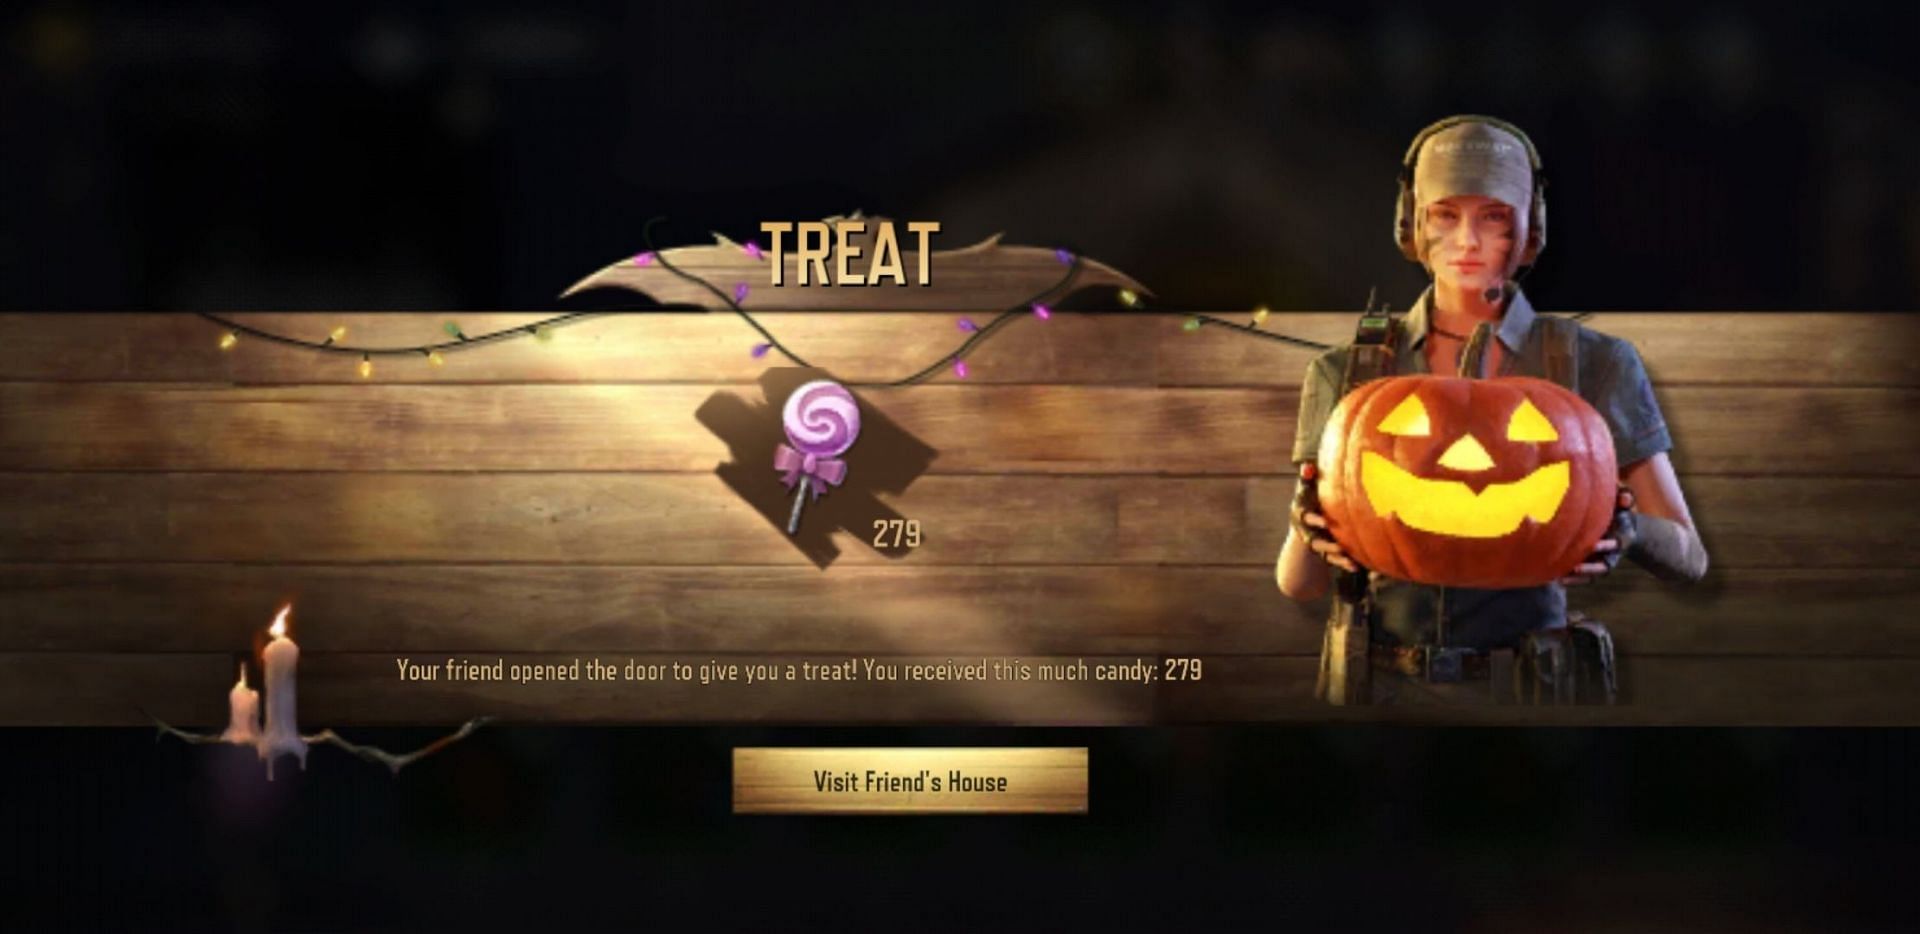 Players can participate in the new Trick or Treat event this Halloween in COD Mobile to earn multiple free rewards (Image via Call of Duty Mobile)